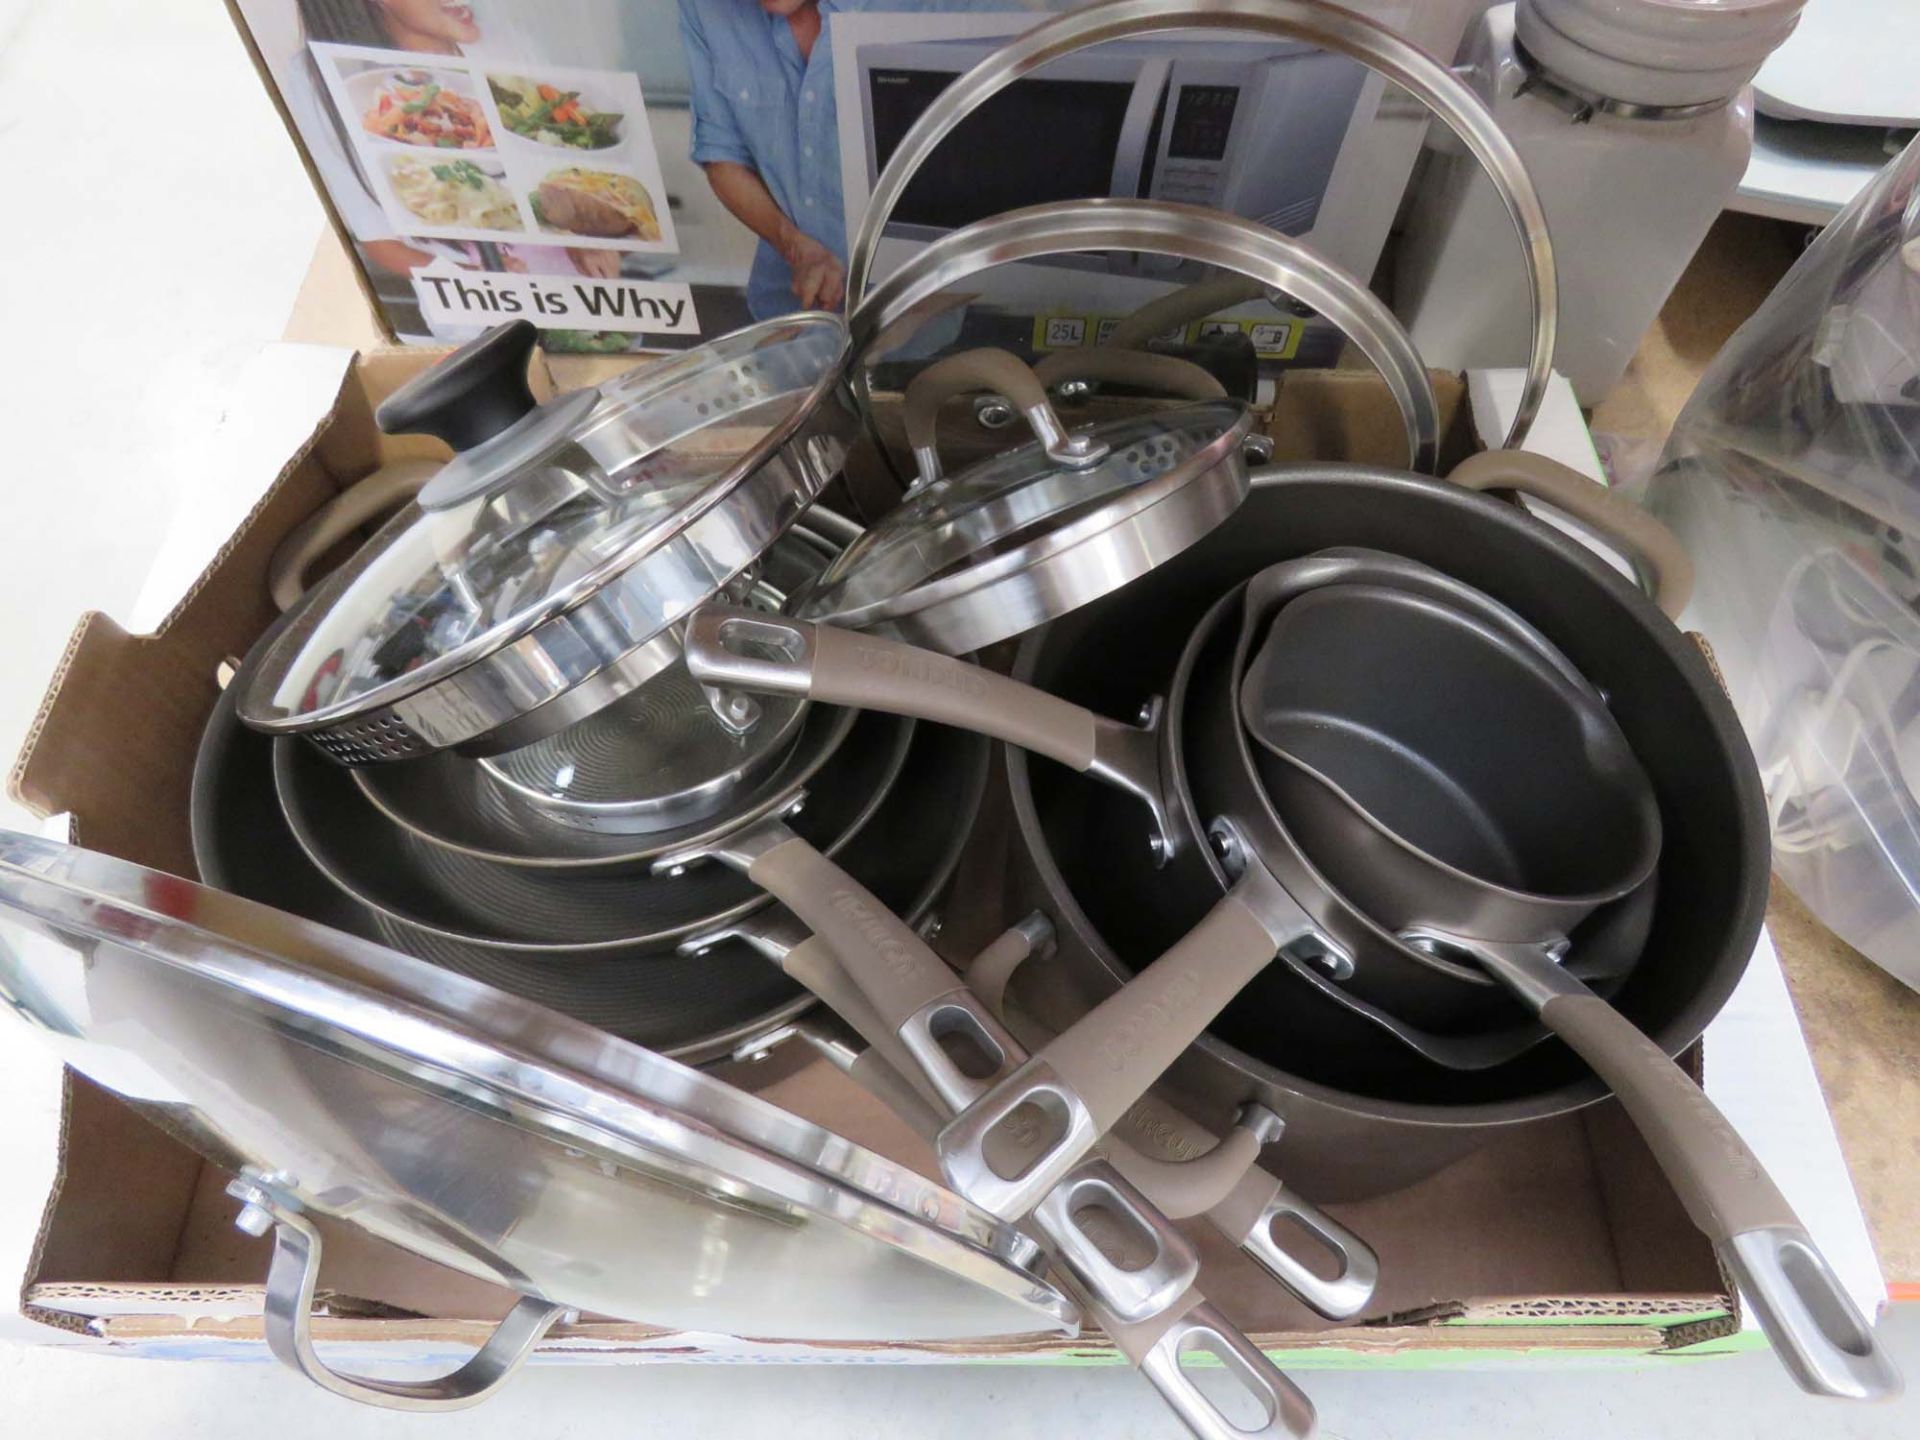 Tray of used Circulon pots and pans